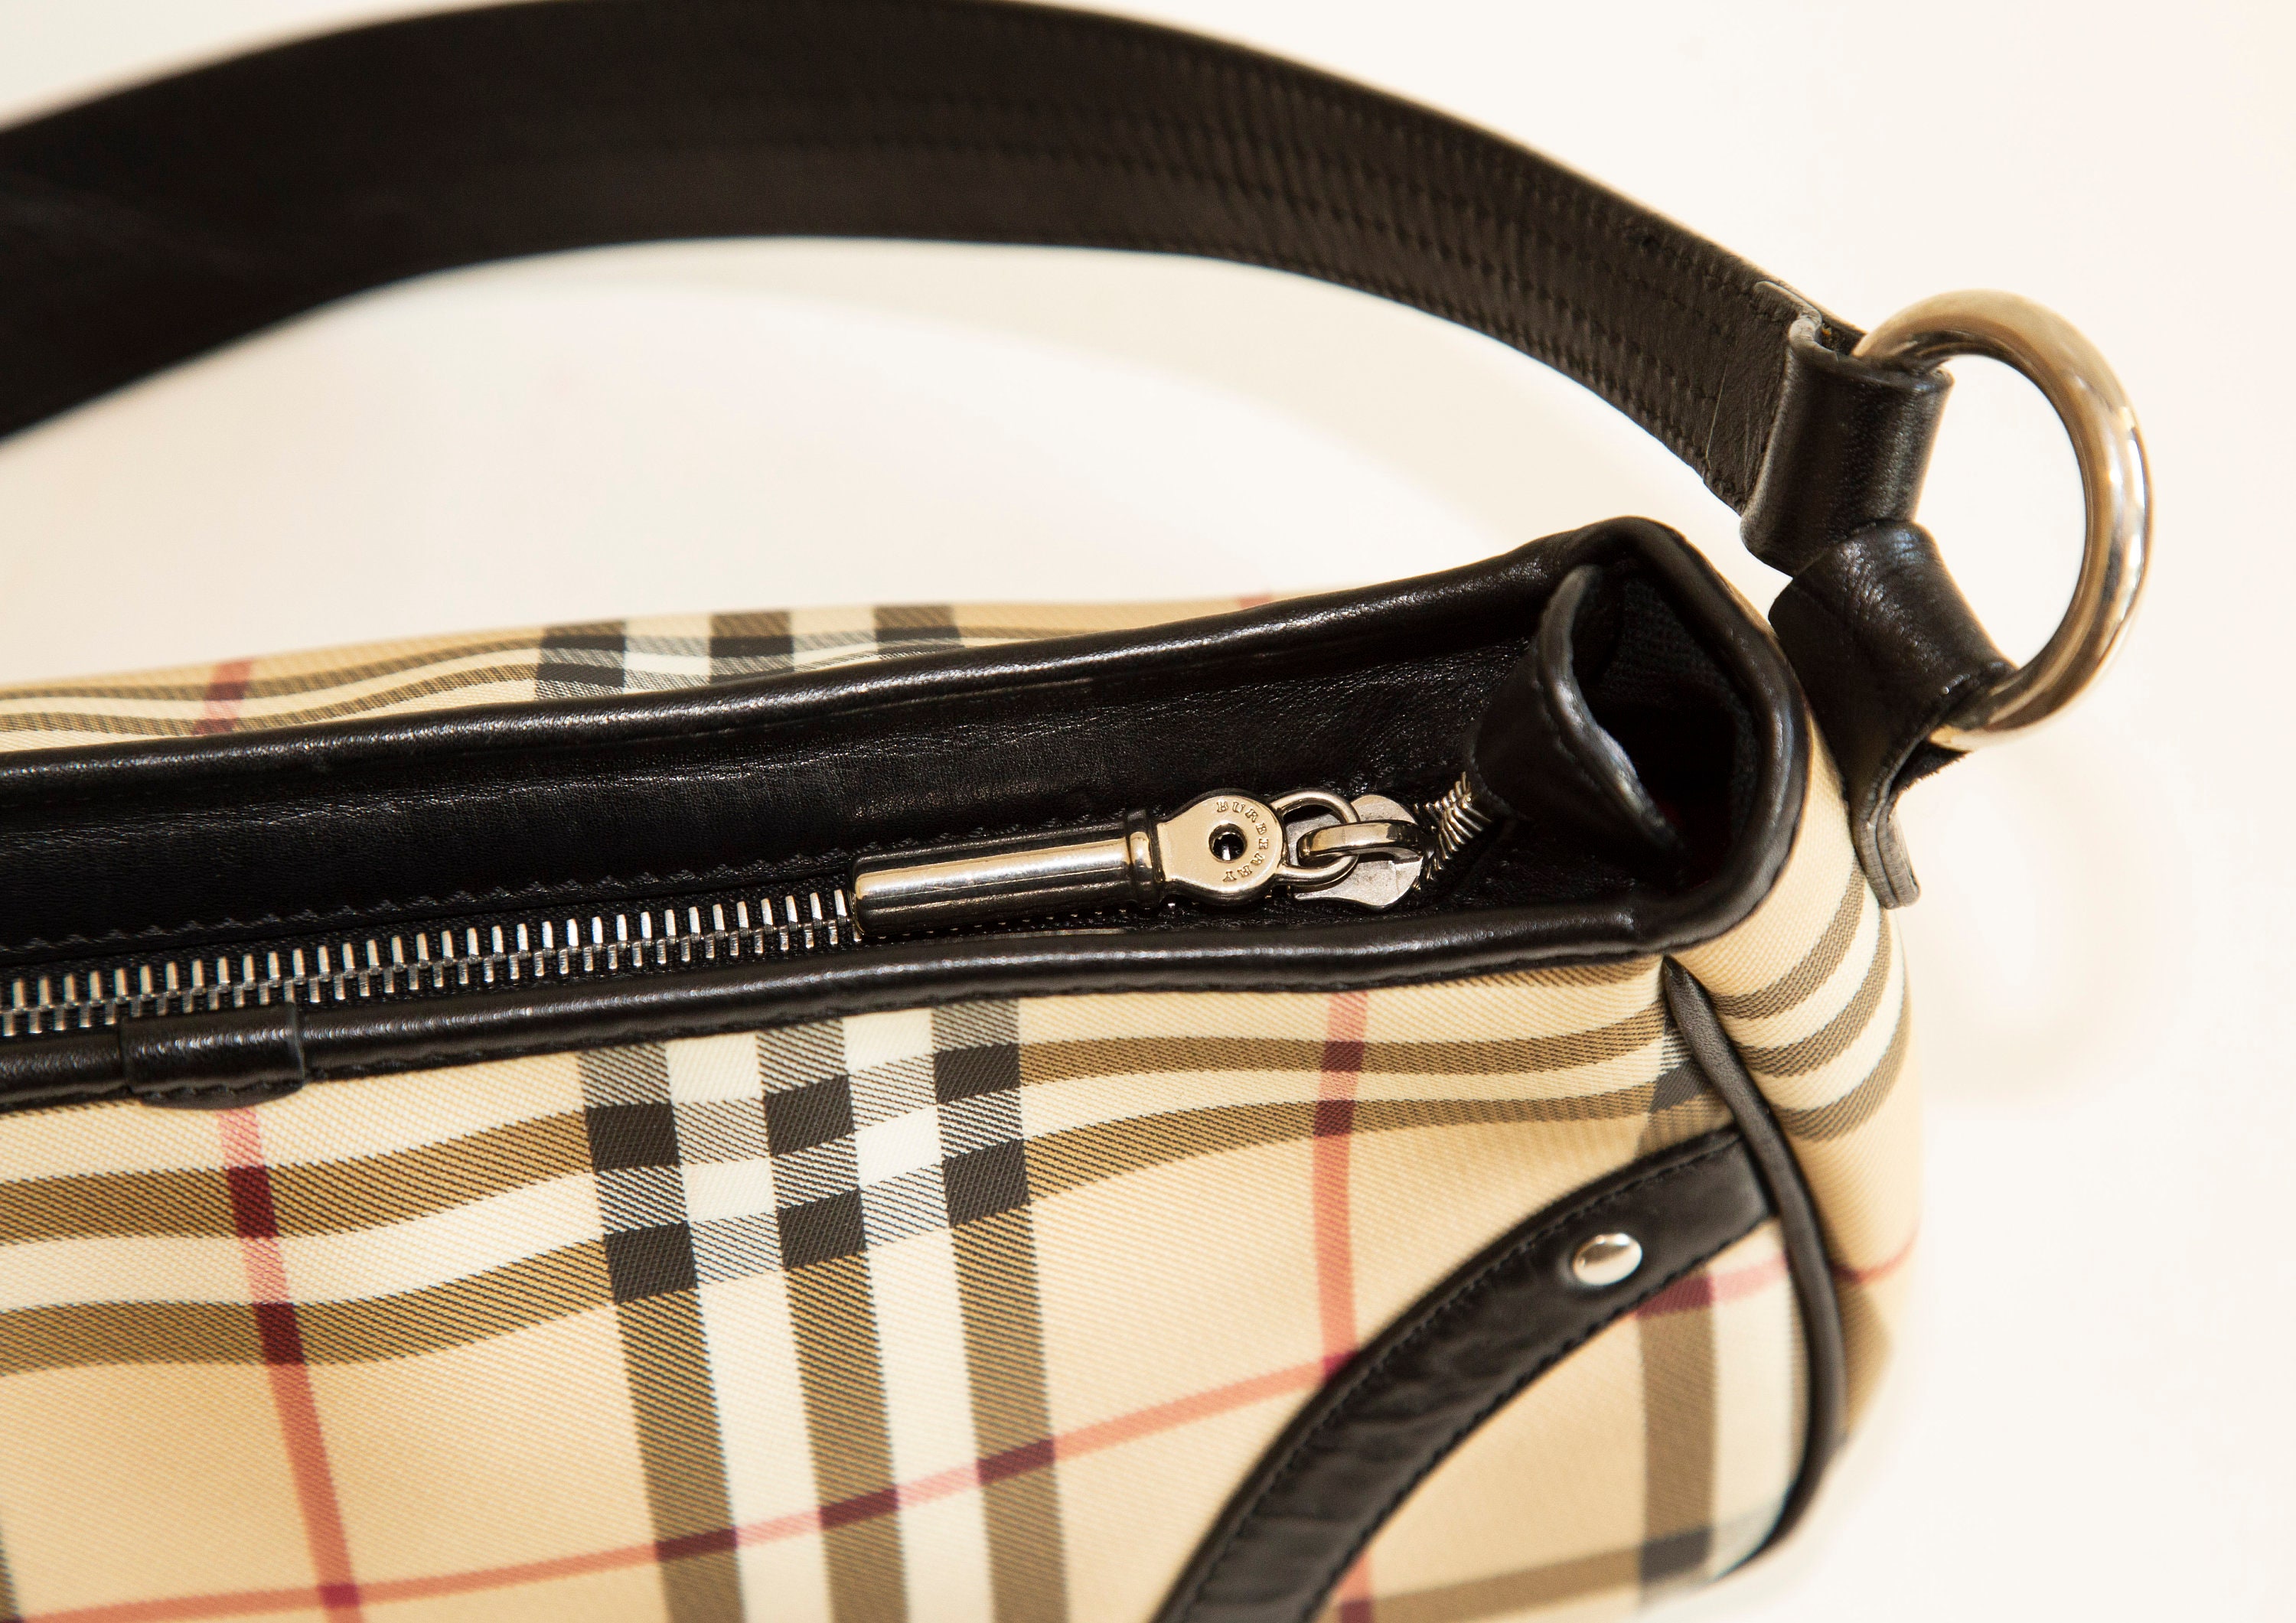 Burberry Messenger Bag Black Used Classic Check Print with a Modern Twist